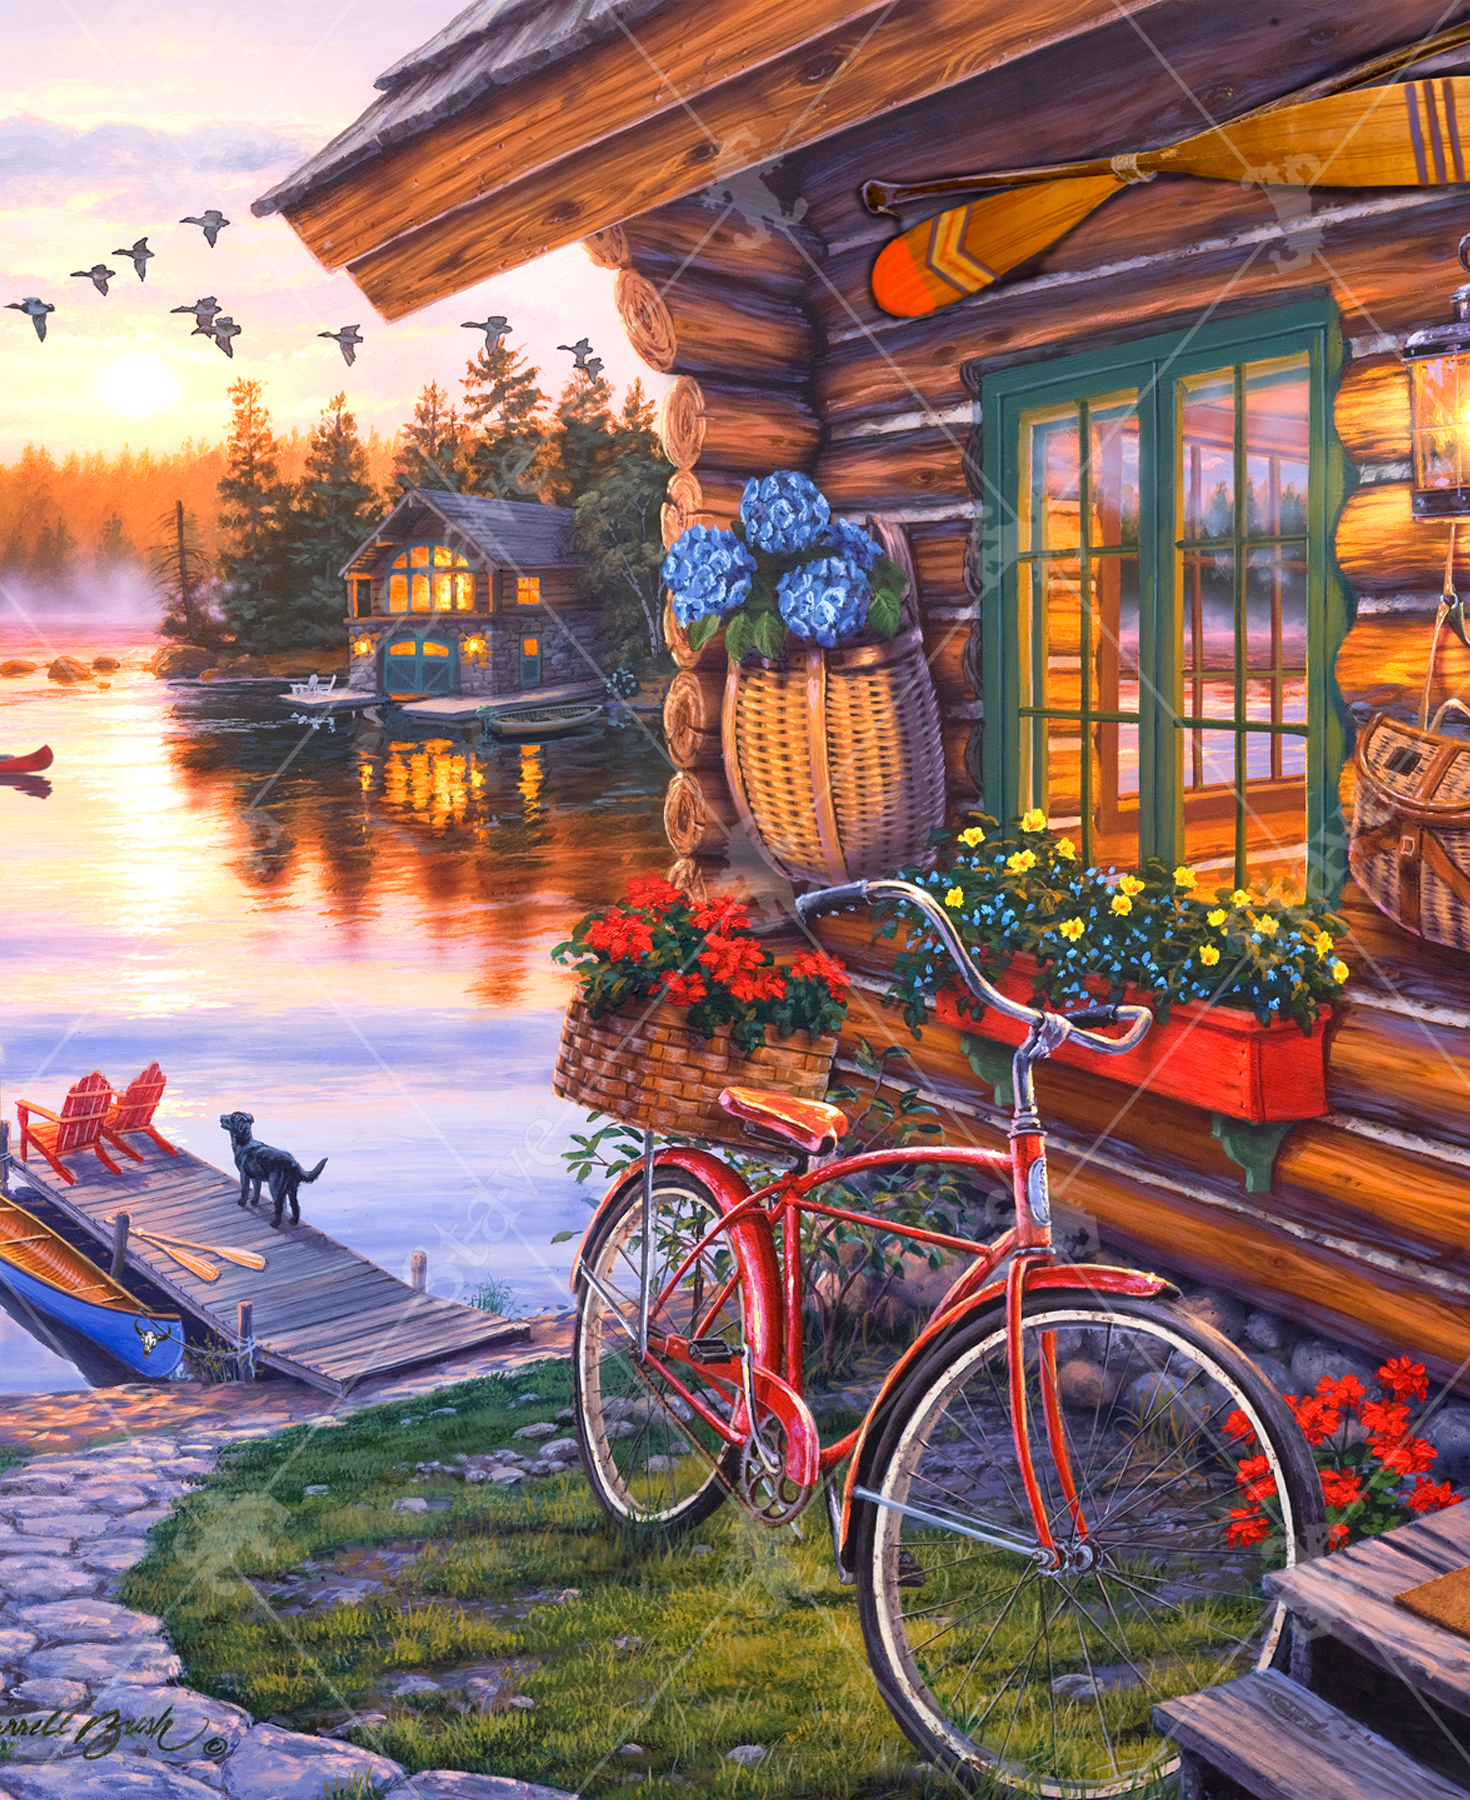 Close-up of Away From It All wooden jigsaw puzzle featuring a log cabin on the lake, with its door half open and a fire blazing inside. There is a path that leads to a boat dock, where a dog stands looking out towards the water as its owner takes a canoe out for a ride as the sun sets. A flock of geese fly overhead and another cabin's lights glow in between the pine trees.